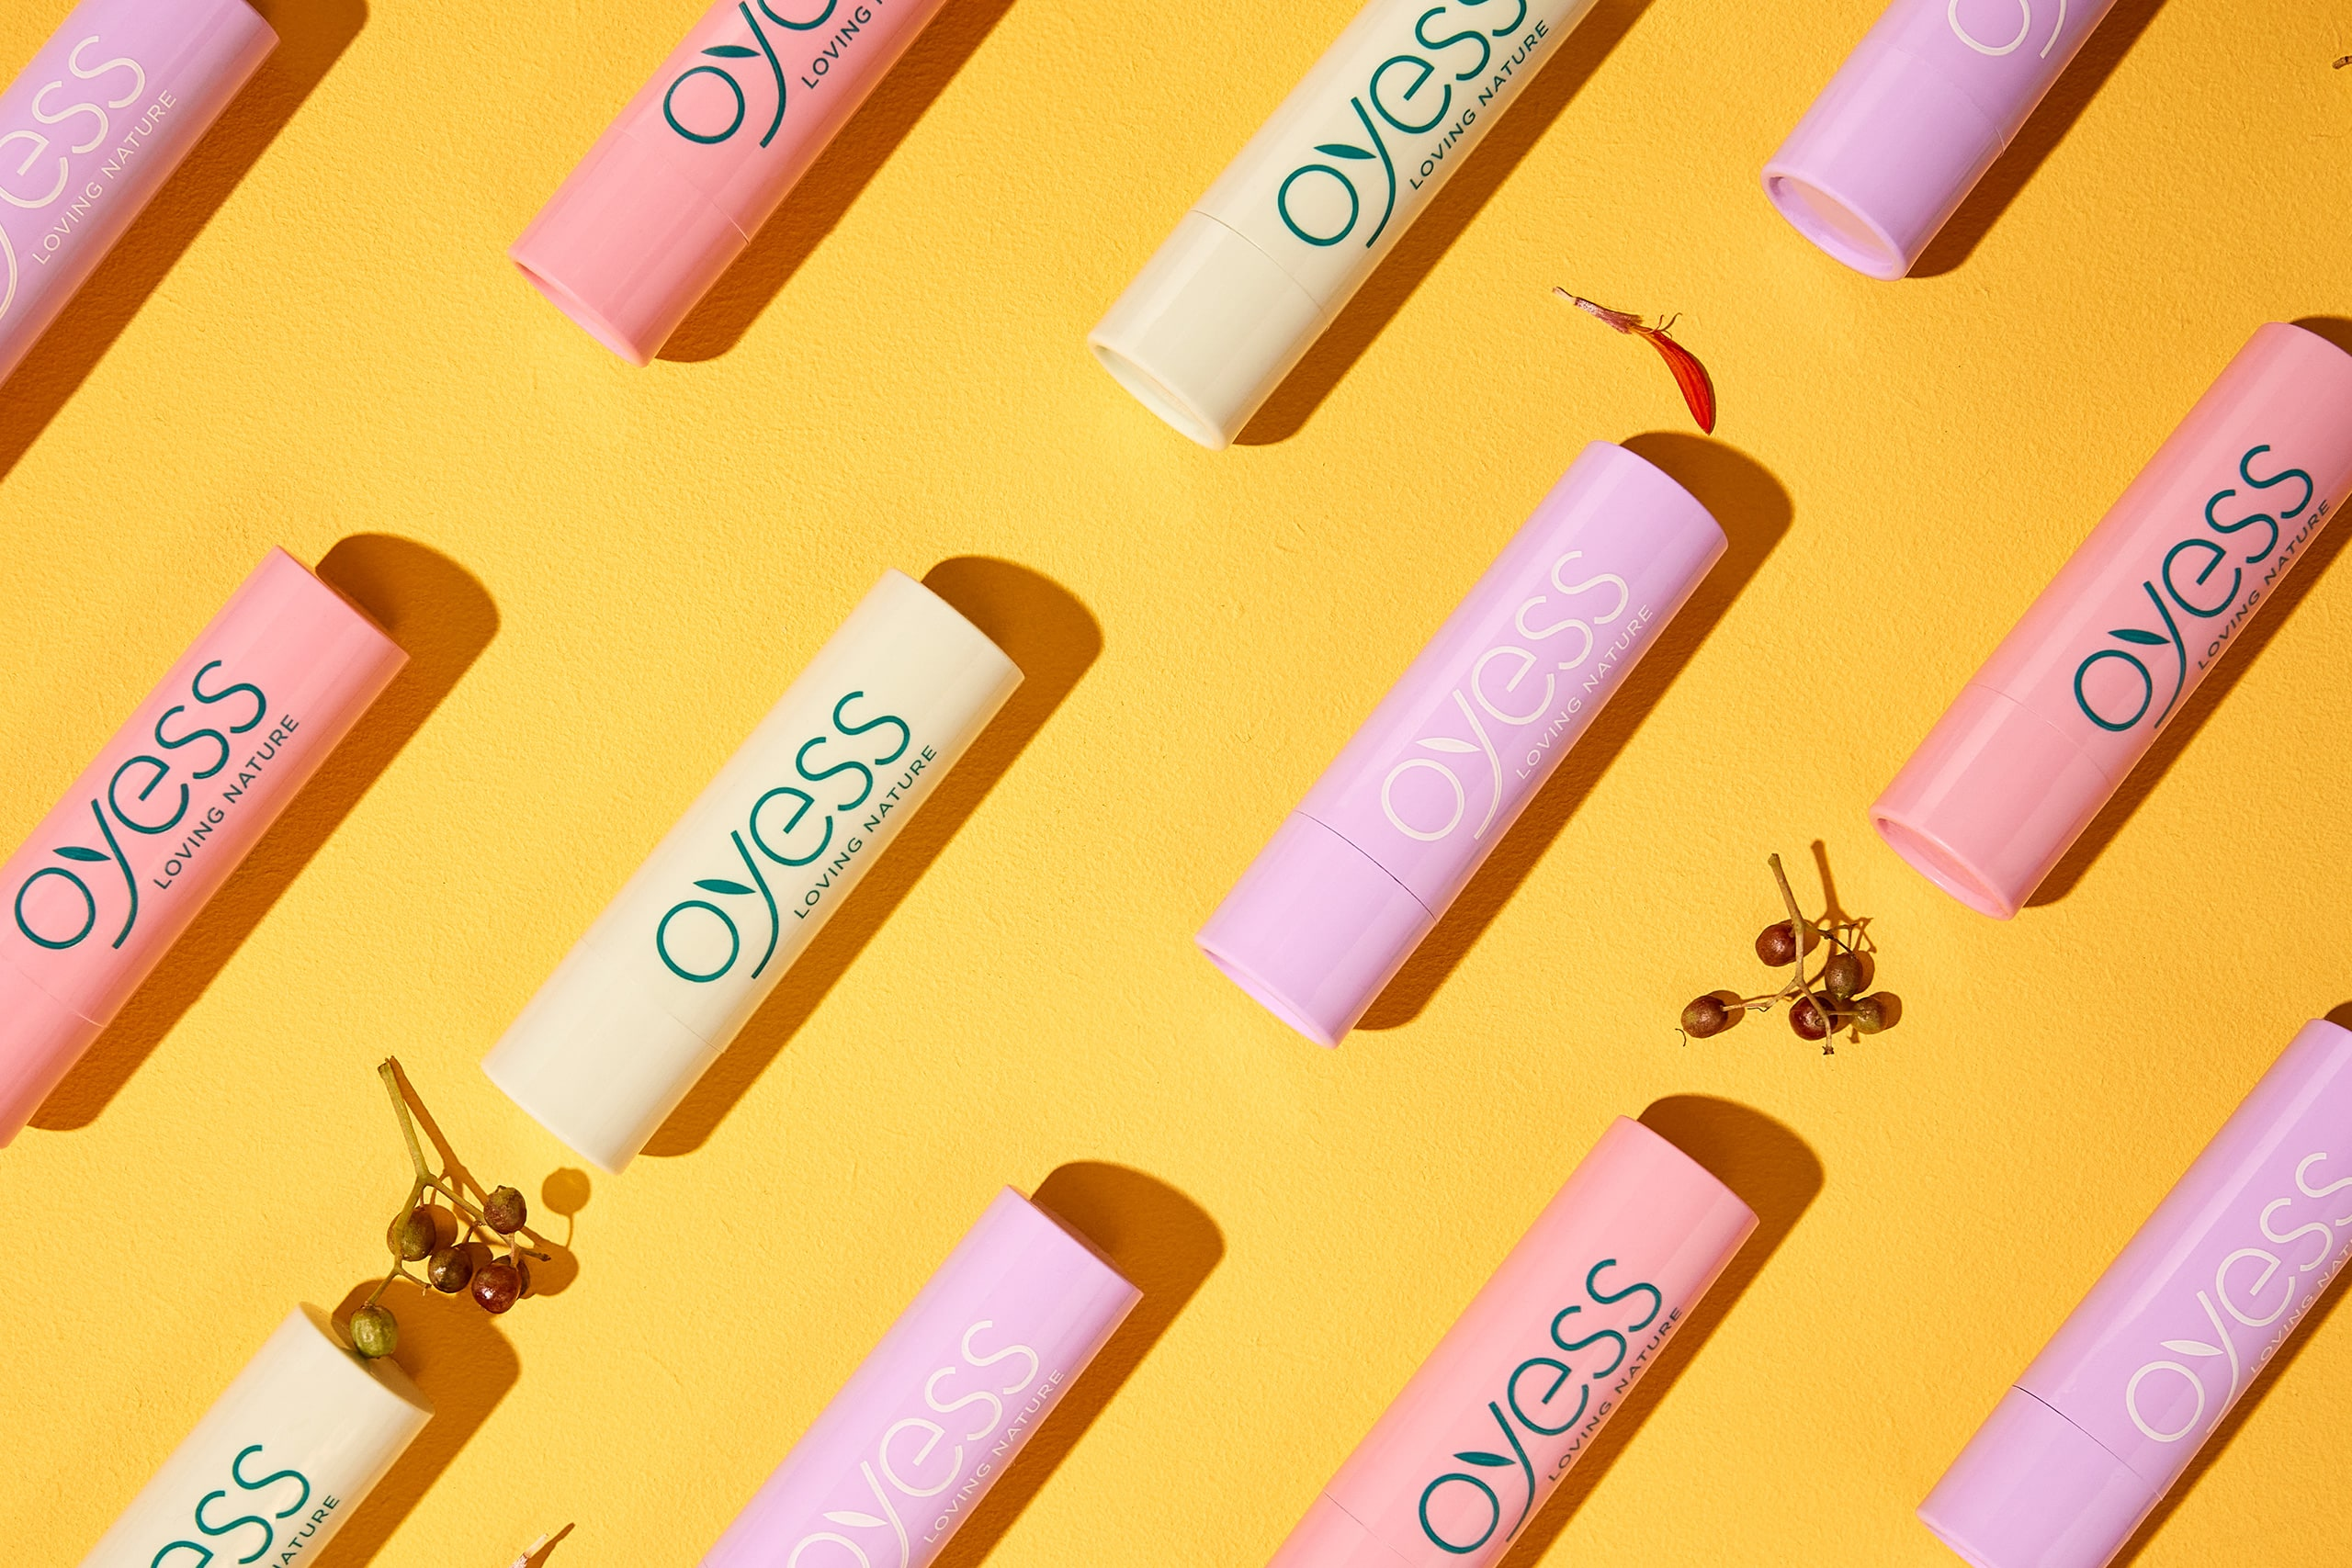 Several sticks of OYESS lip balm on a yellow coloured surface.